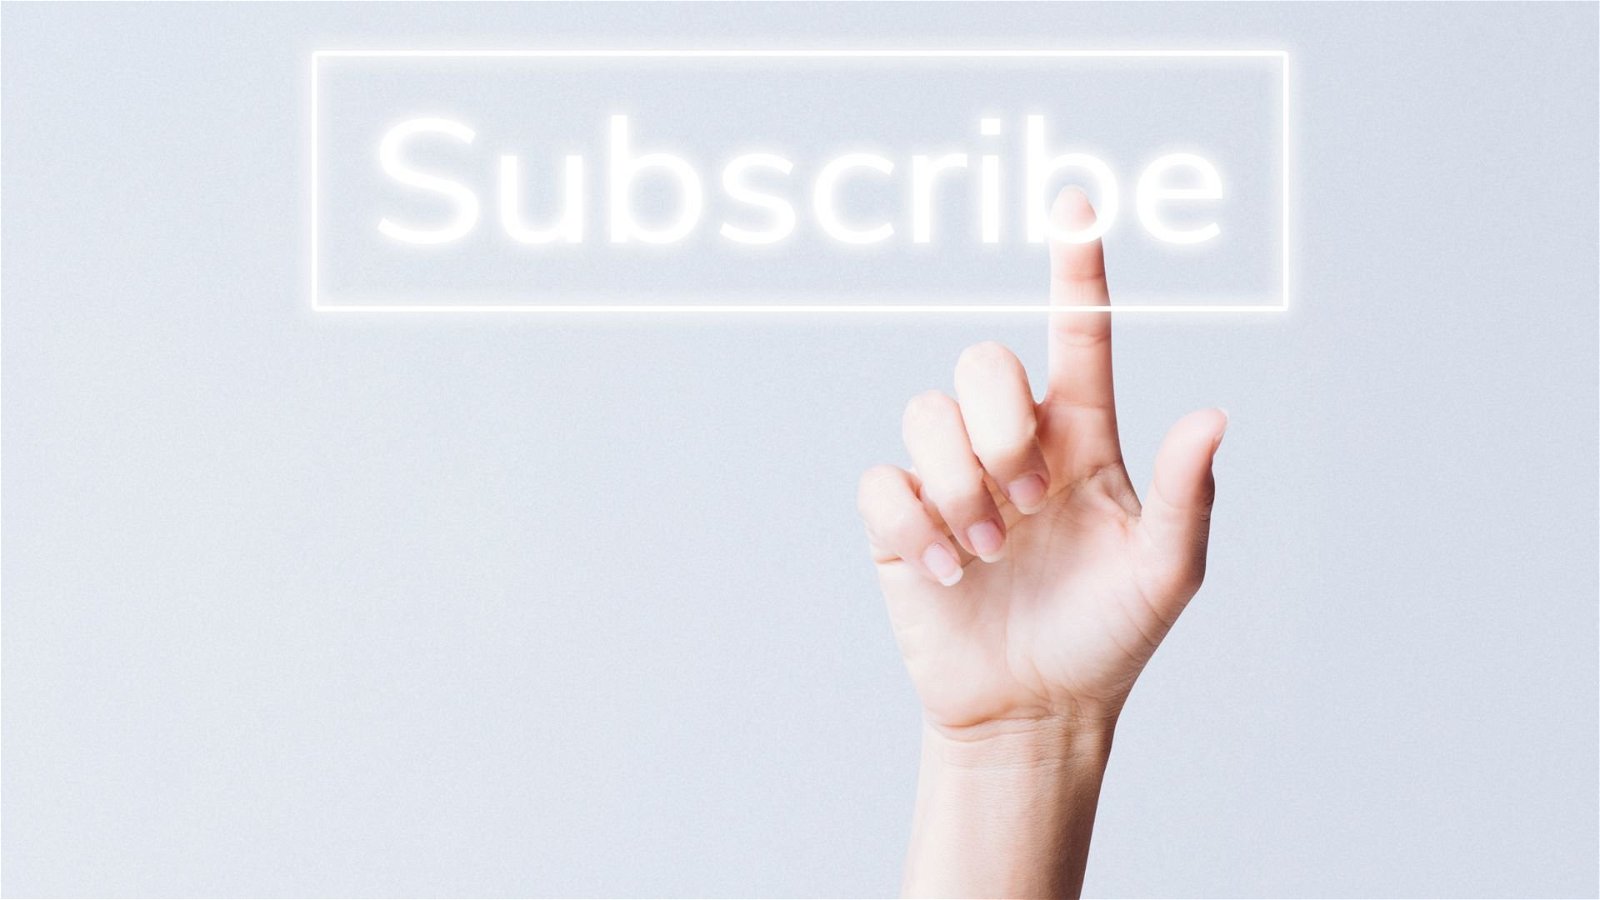 LearnDash subscriptions feature